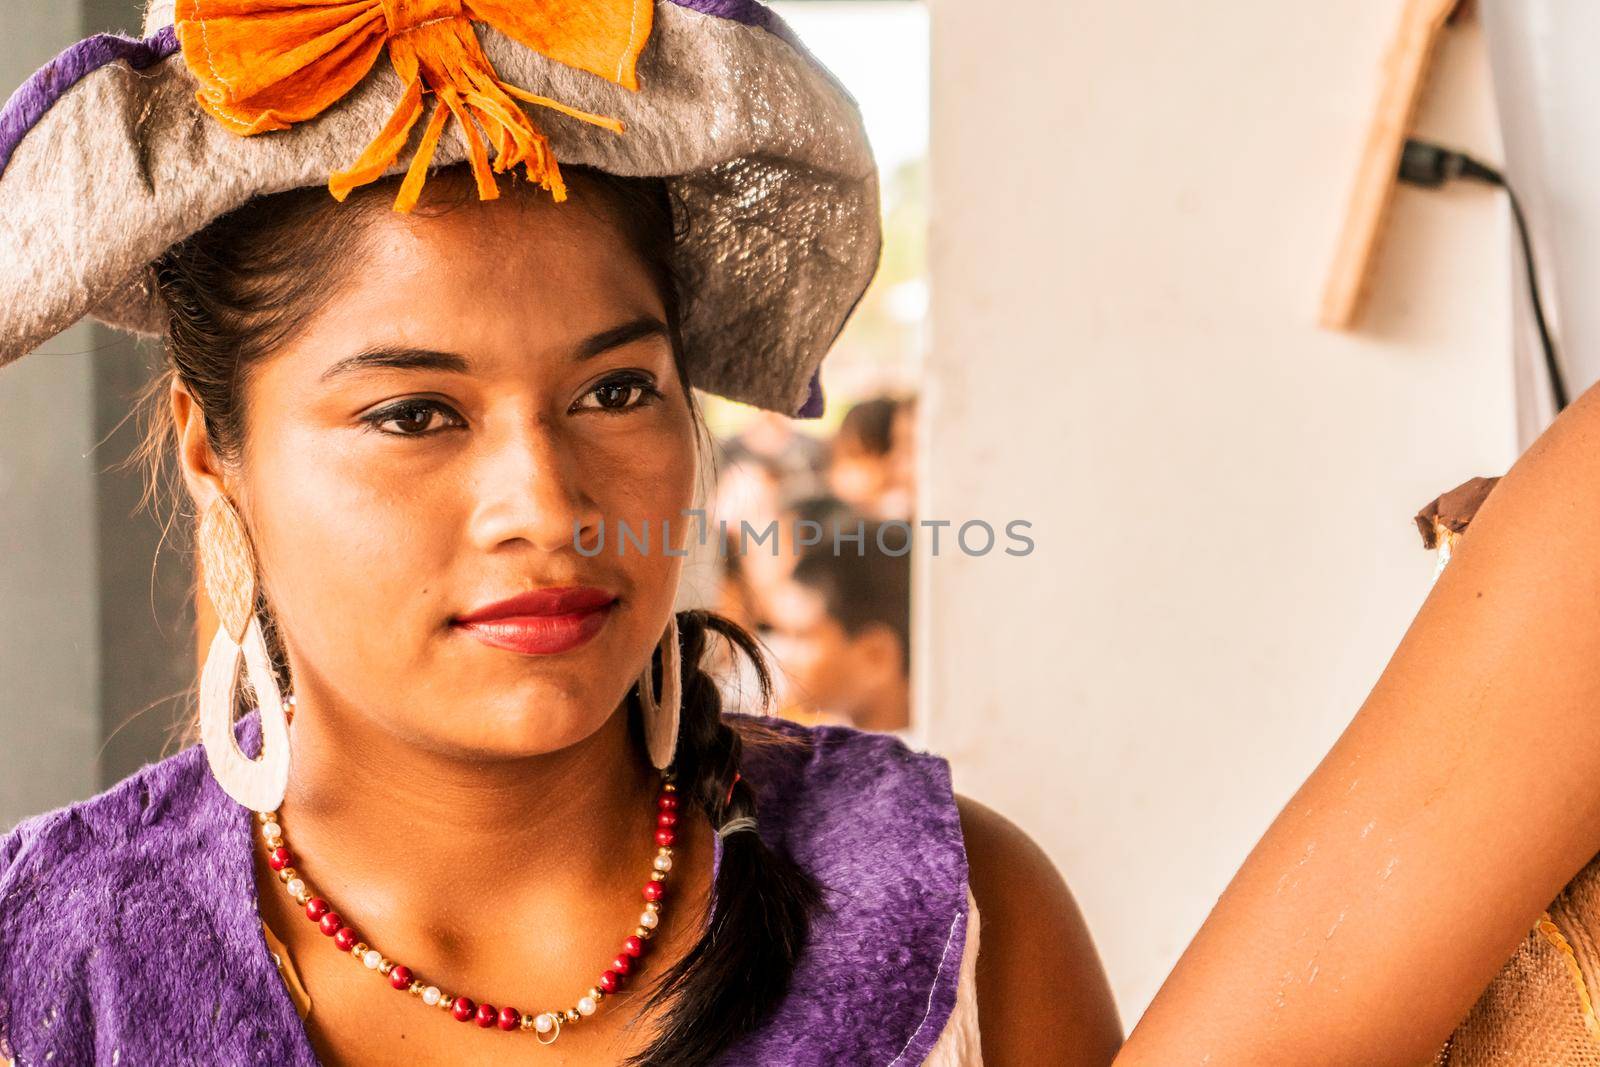 Indigenous woman with traditional clothing from the Miskito and Mayagna communities of Nicaragua by cfalvarez